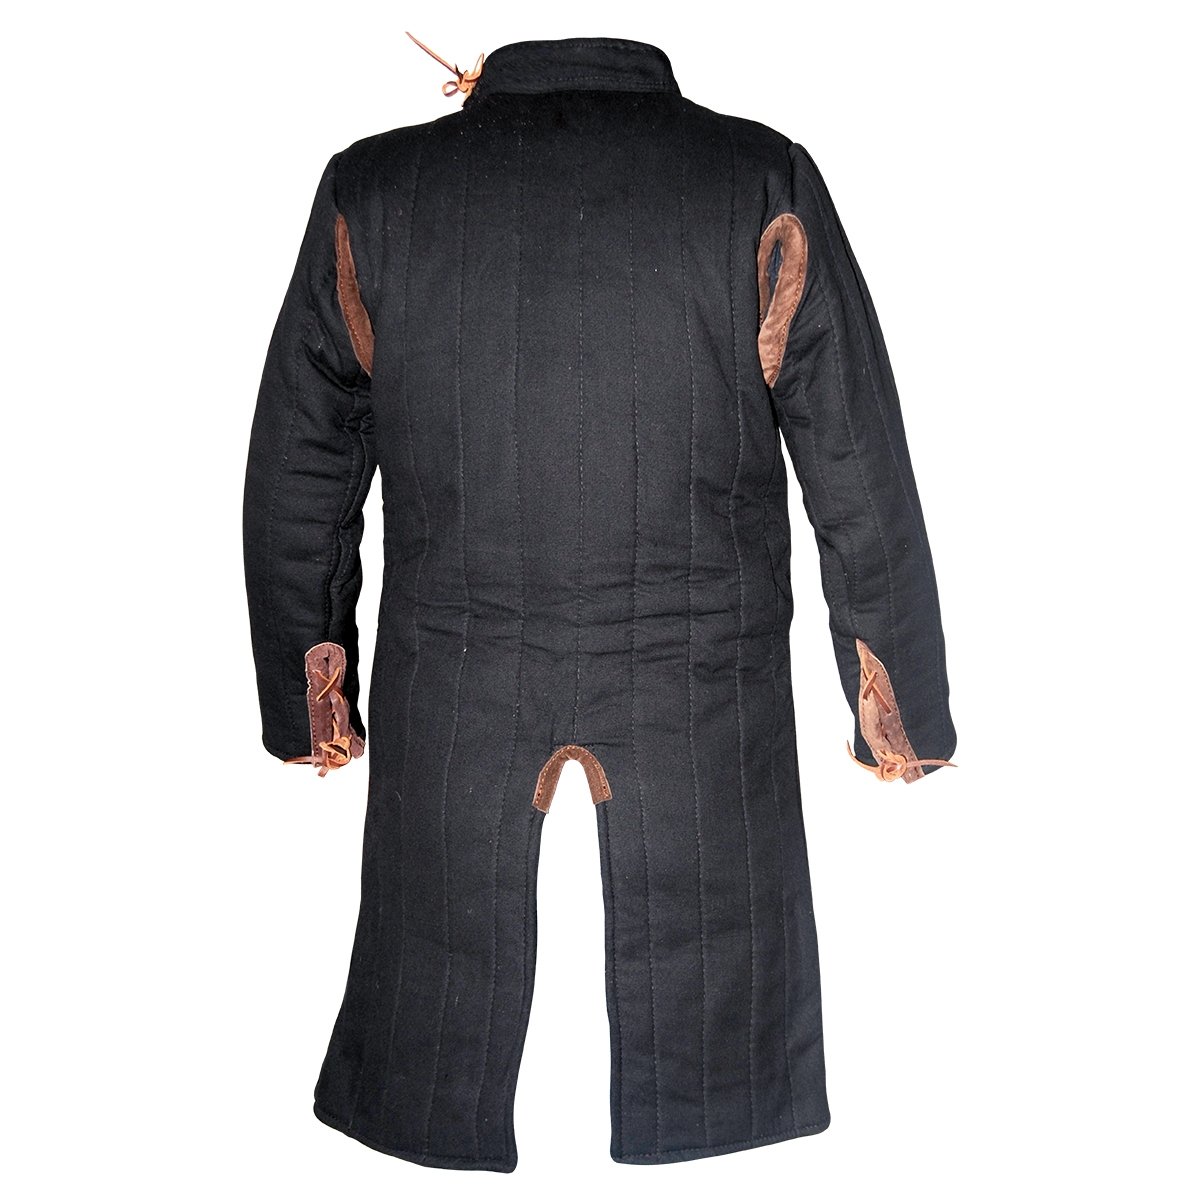 Closed Gambeson Late 12th C./Early 13th C., Black Size XL